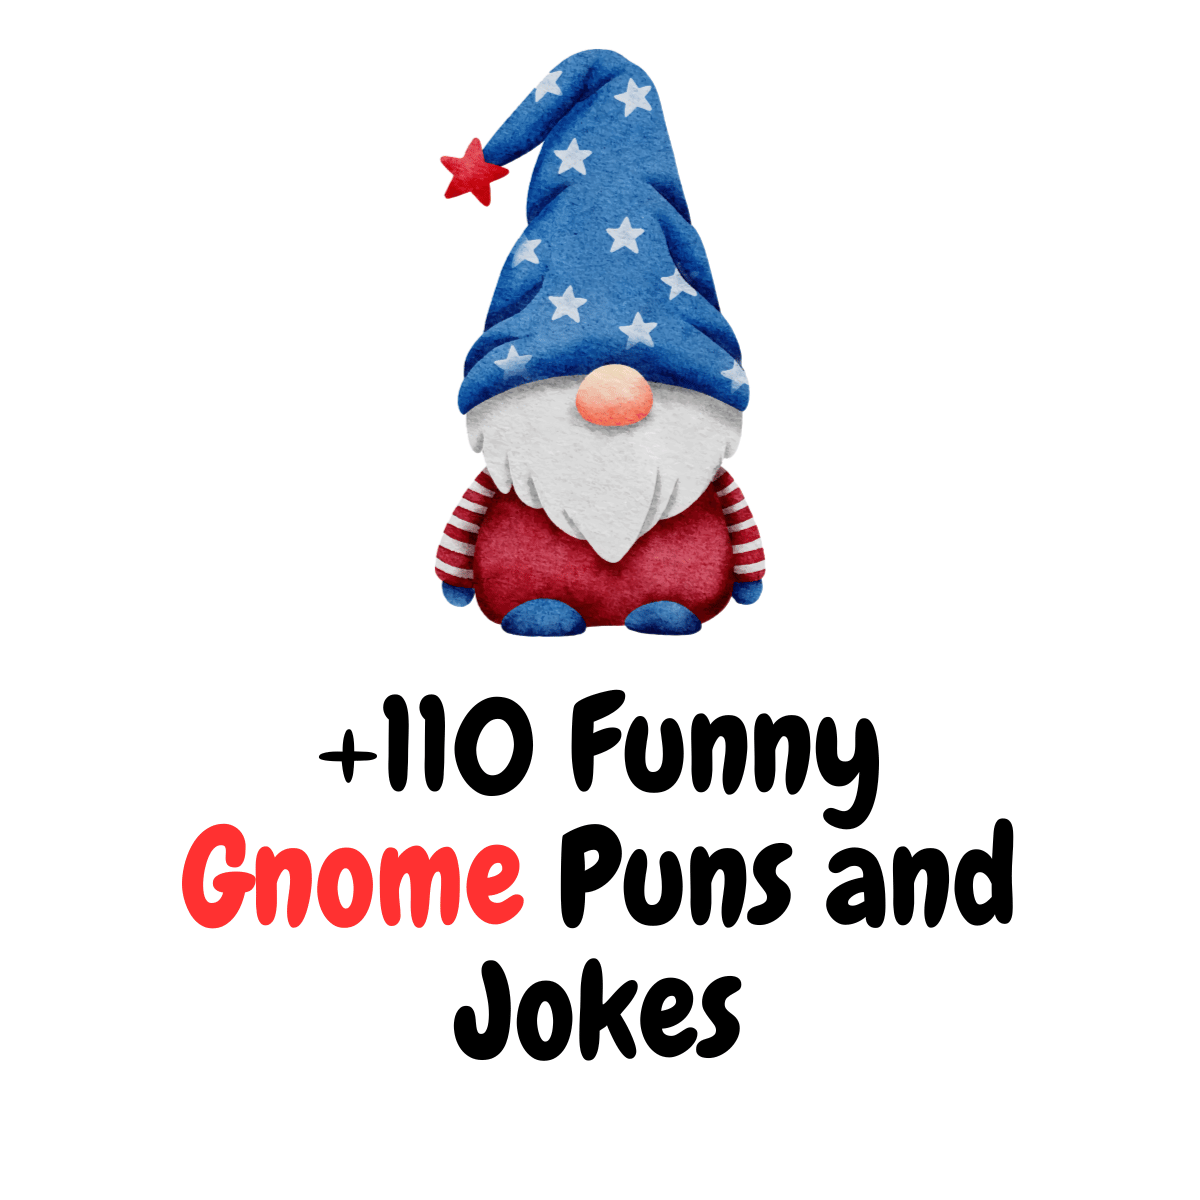 +110 Gnome Puns and Jokes to Brighten Your Day